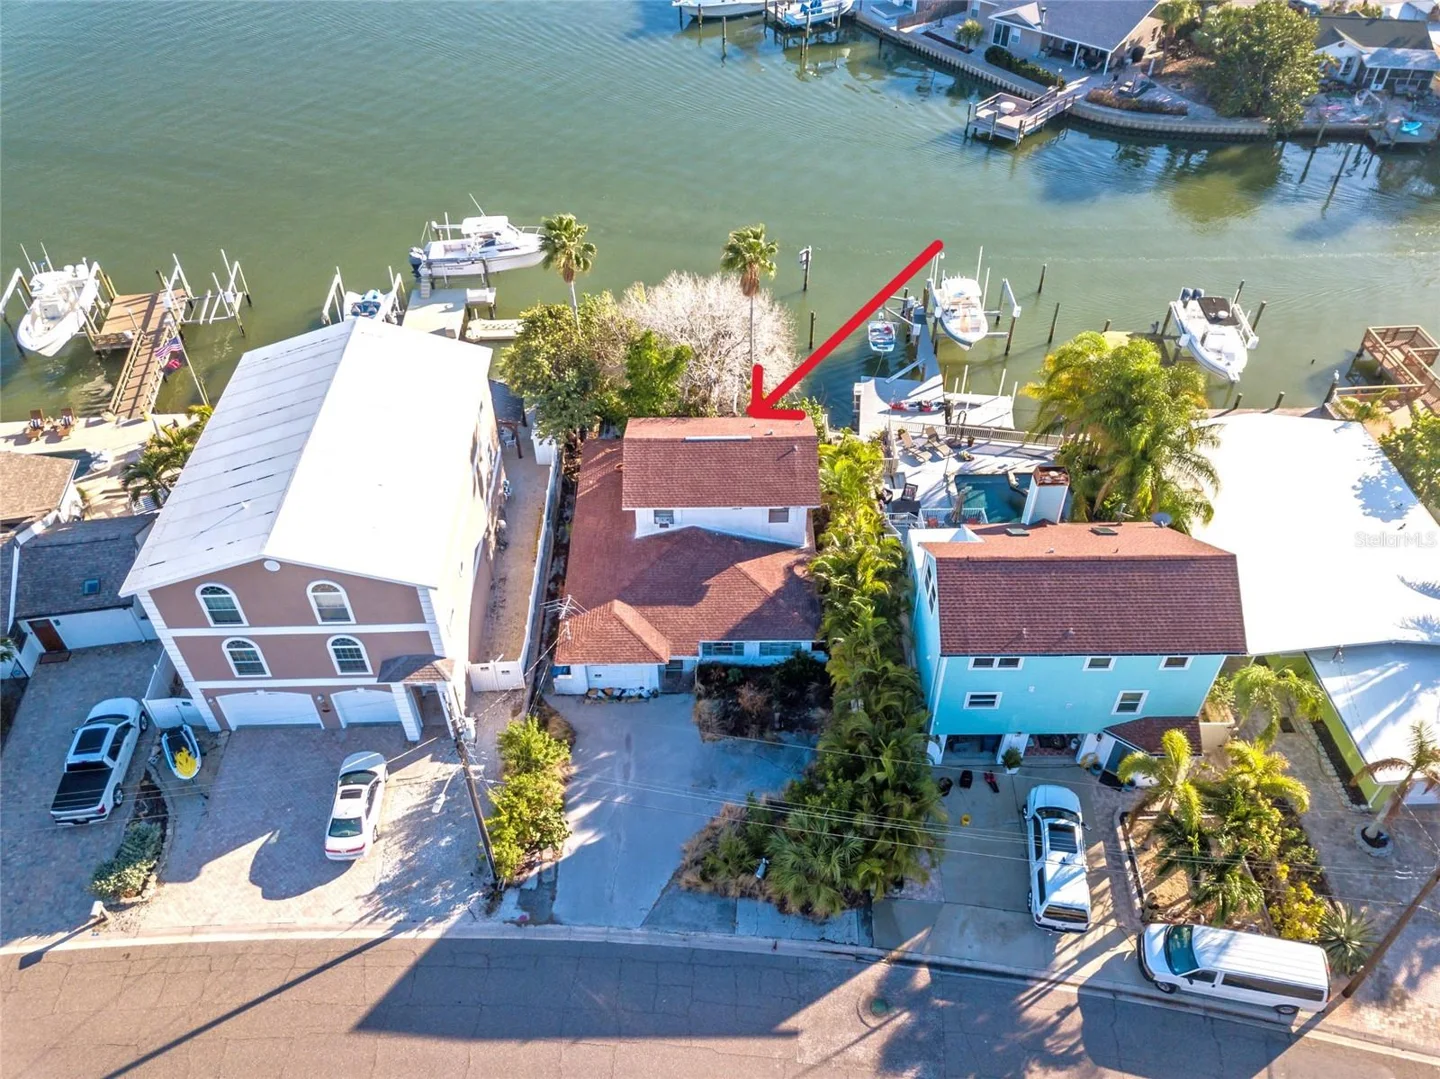 Waterfront Property in Madeira Beach - Great Location